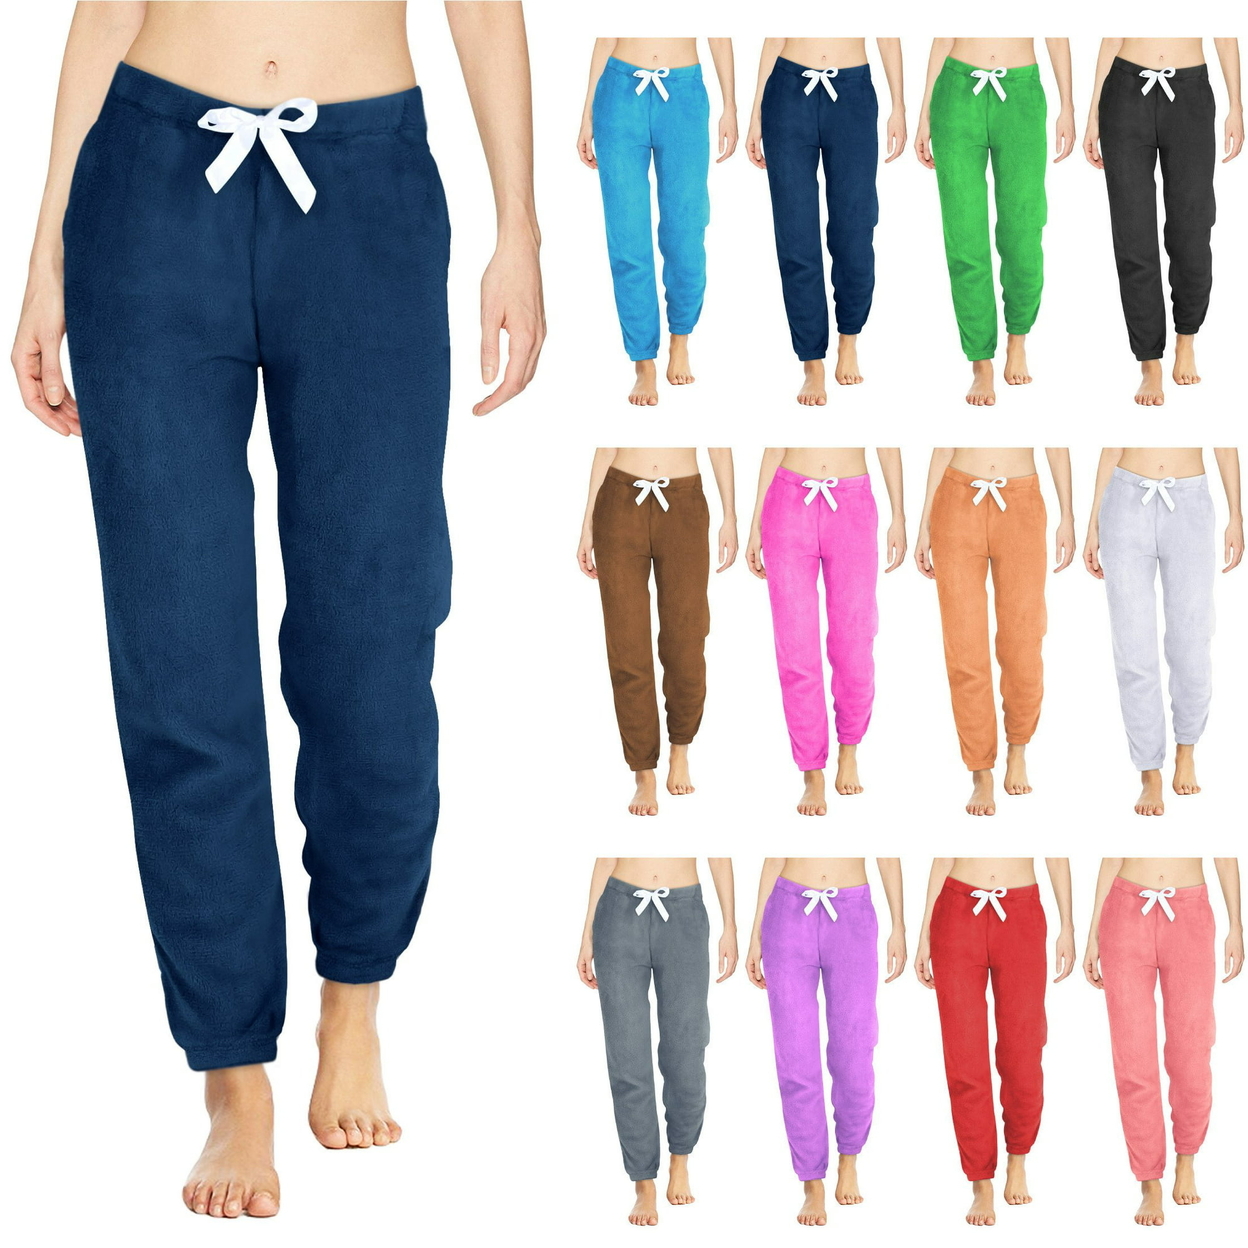 Multi-Pack: Women's Solid & Printed Ultra-Soft Comfy Stretch Micro-Fleece Pajama Lounge Pants - 3-pack, Small, Love